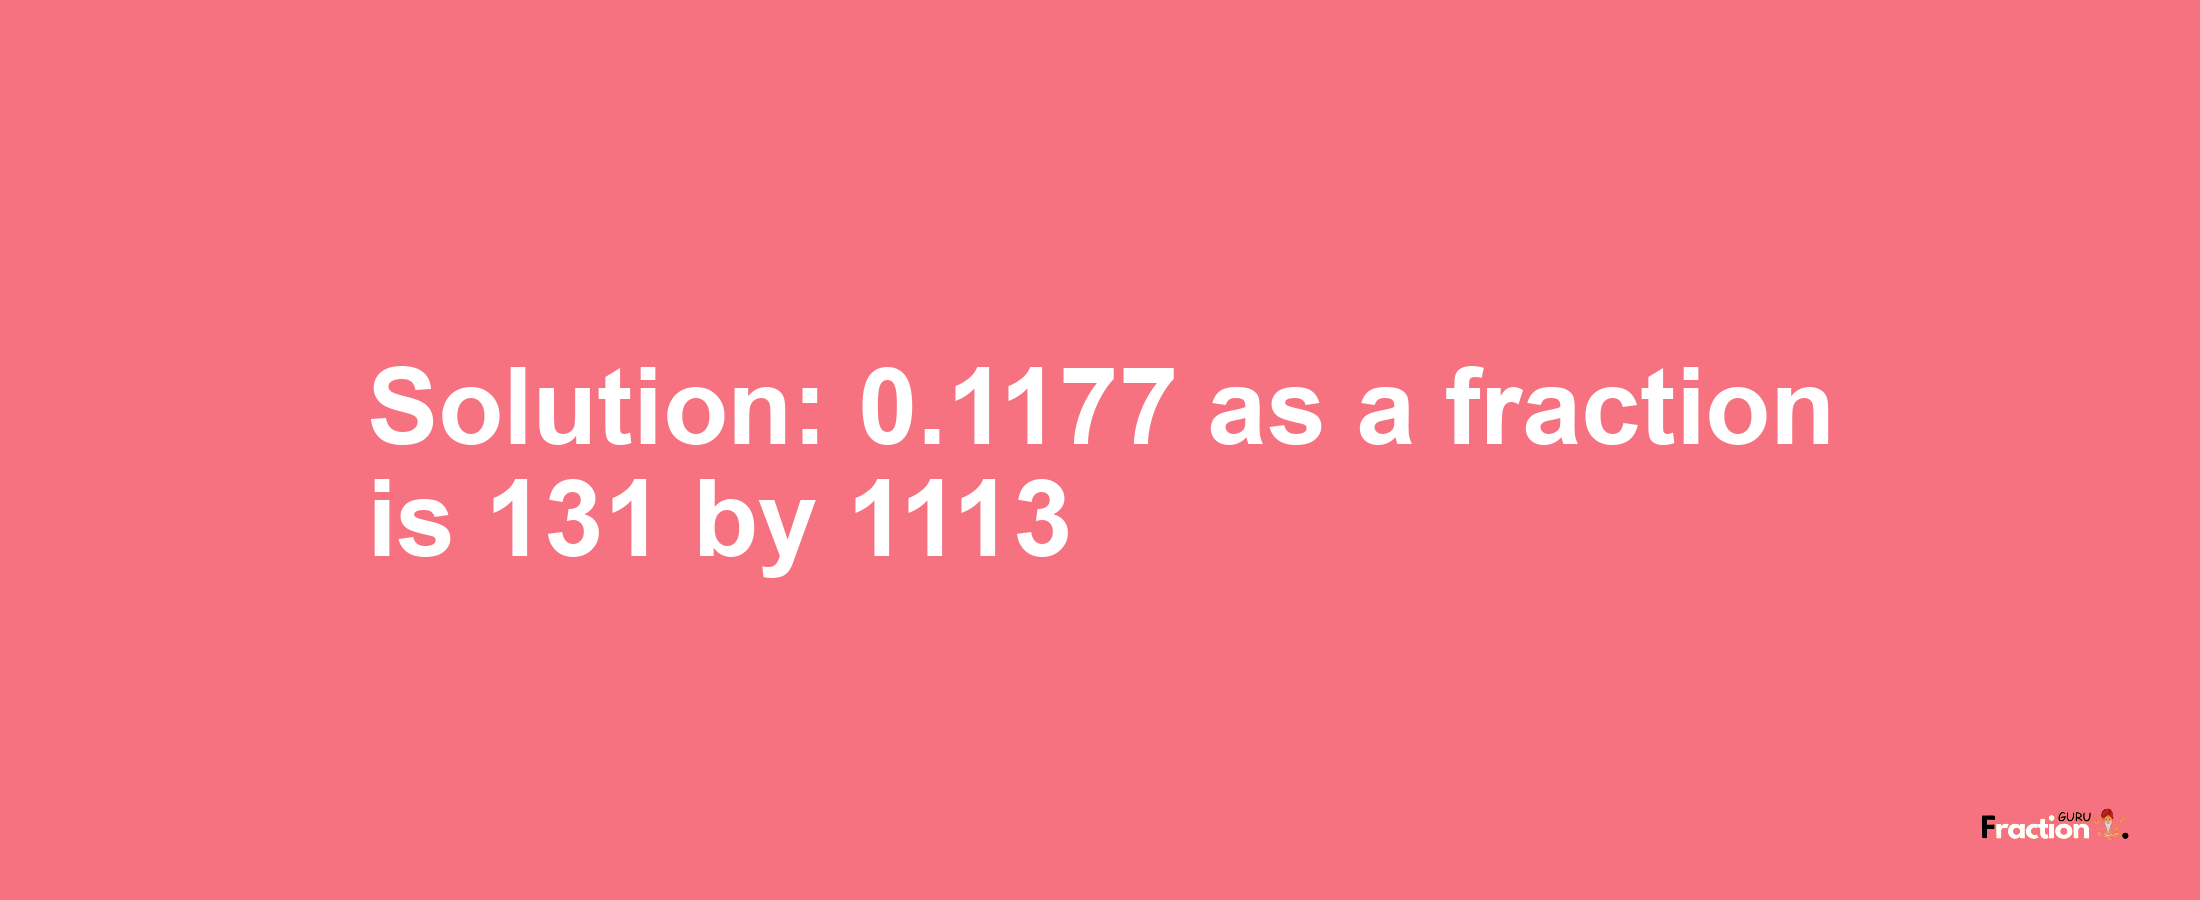 Solution:0.1177 as a fraction is 131/1113